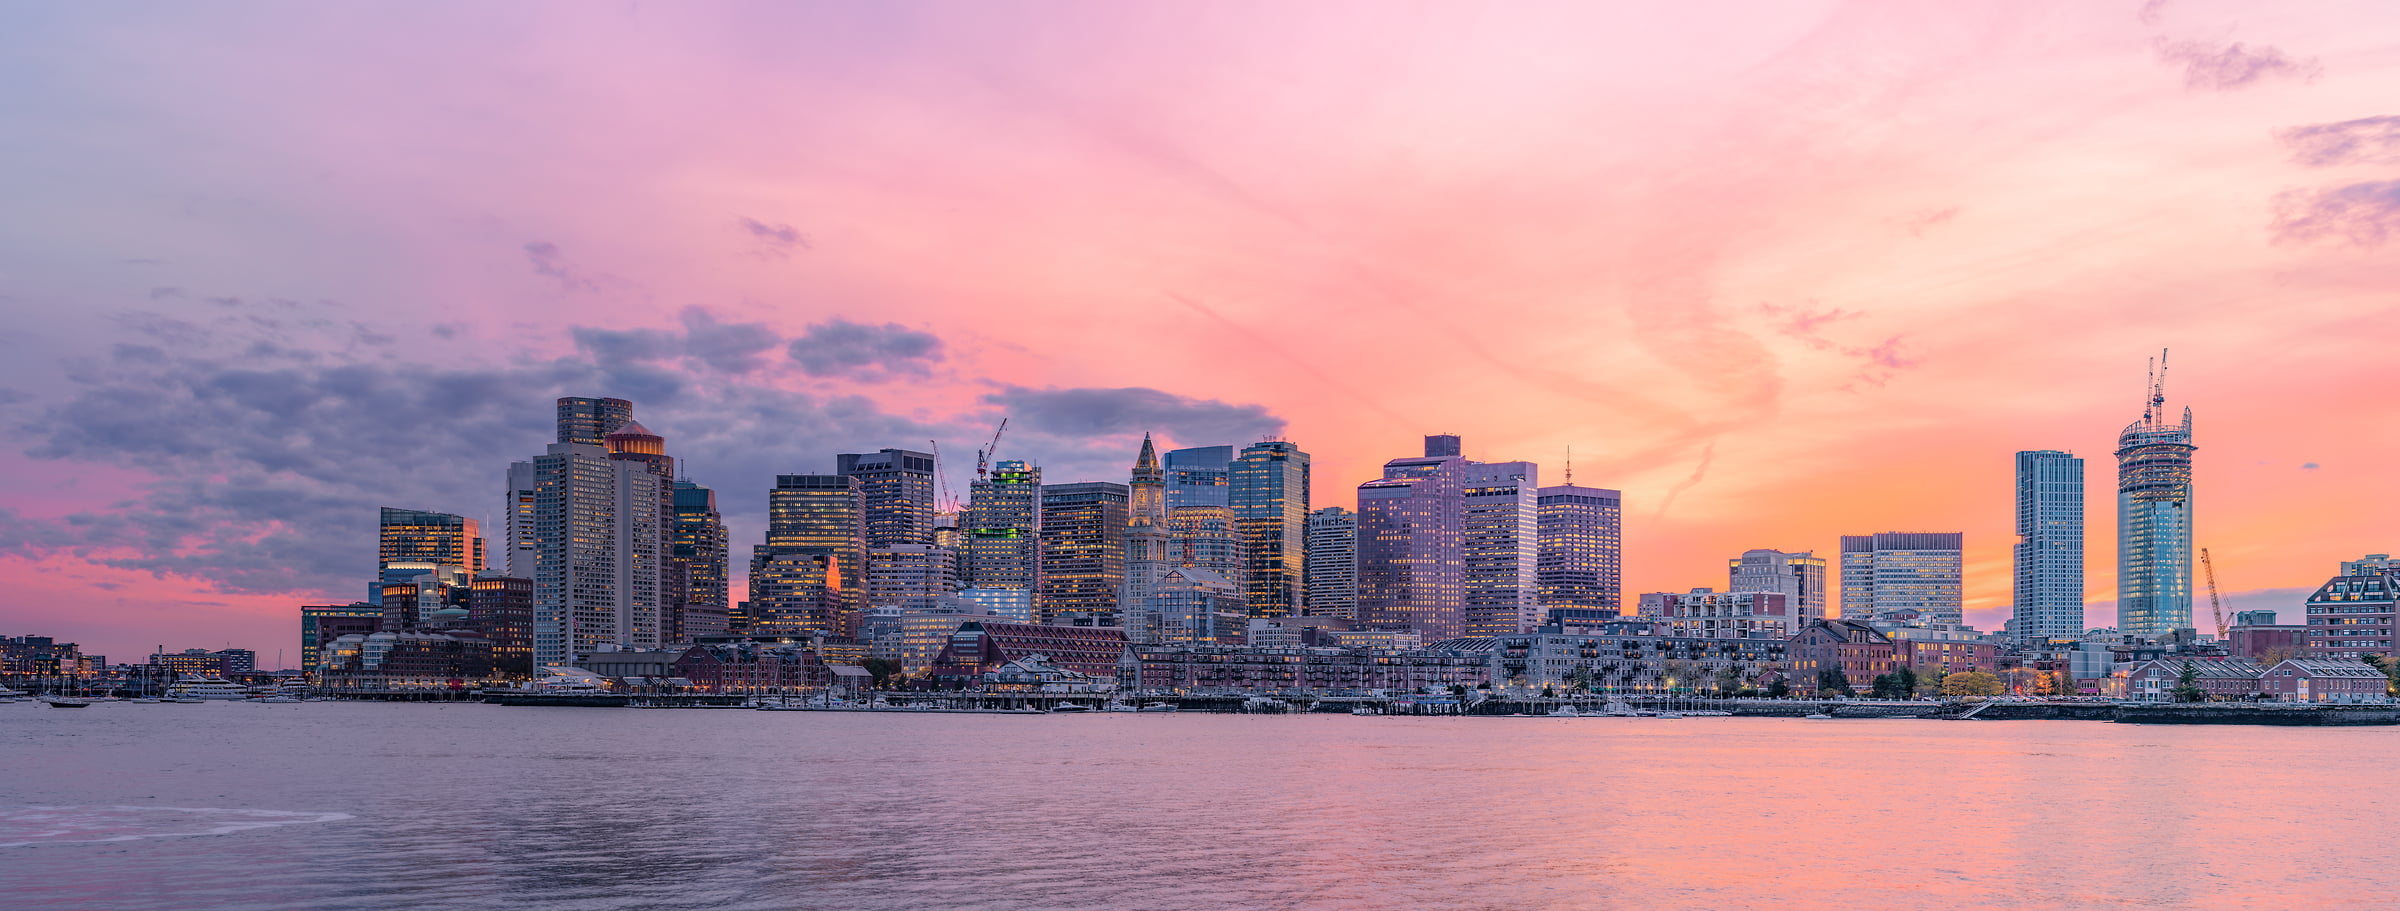 603 megapixels! A very high resolution, large-format VAST photo print of the Boston skyline at sunset; cityscape photograph created by Chris Blake in Boston, Massachusetts.